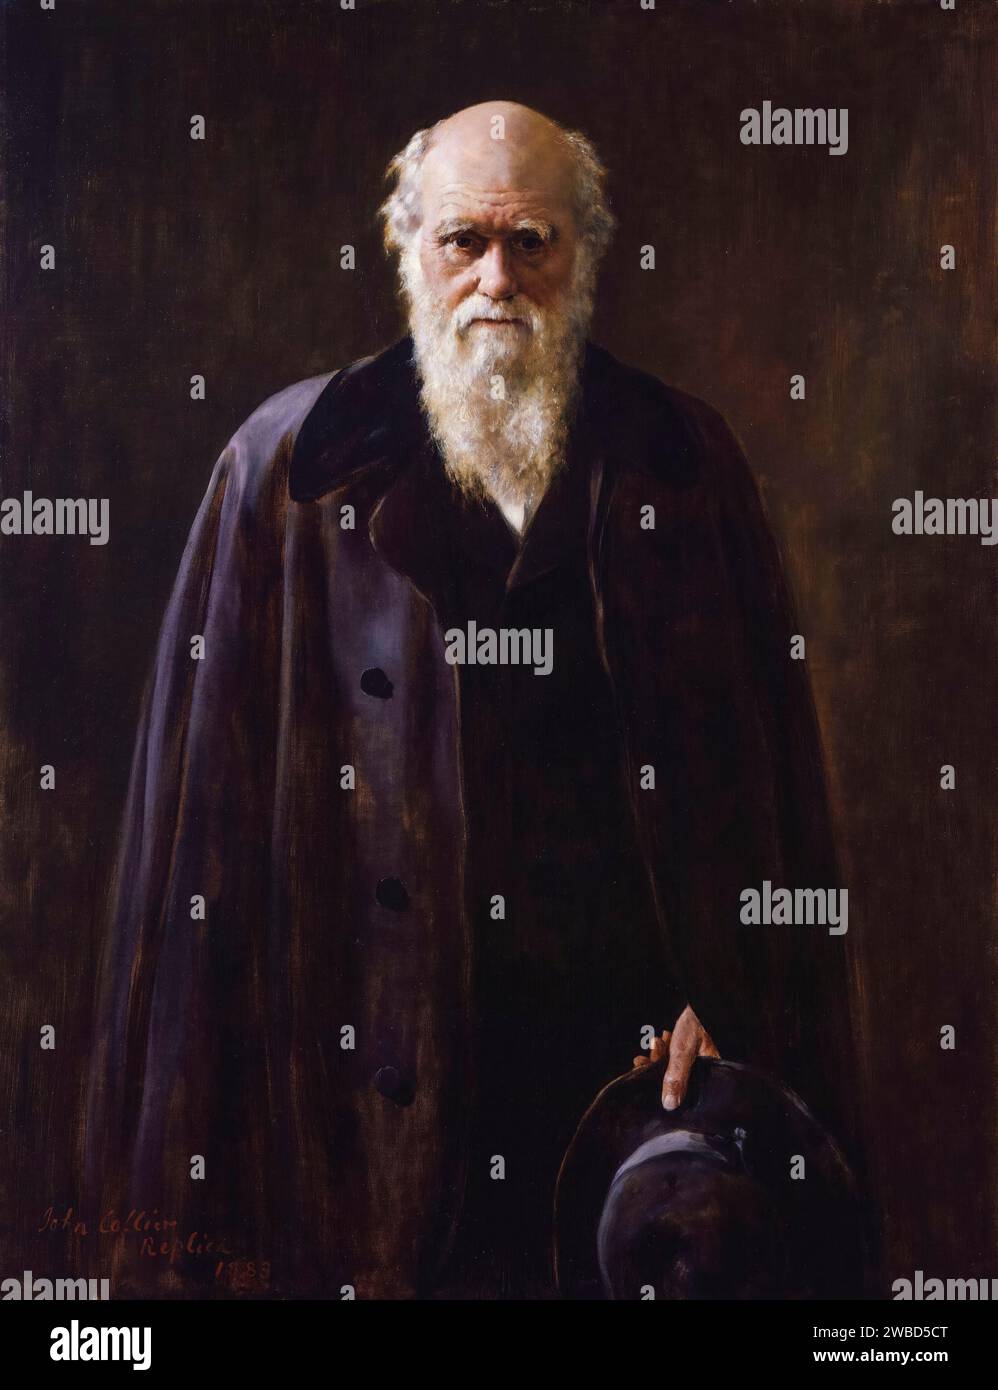 Charles Darwin. Portrait of Charles Robert Darwin (1809-1882), English naturalist, geologist, and biologist, portrait painting in oil on canvas by John Collier, 1883 Stock Photo